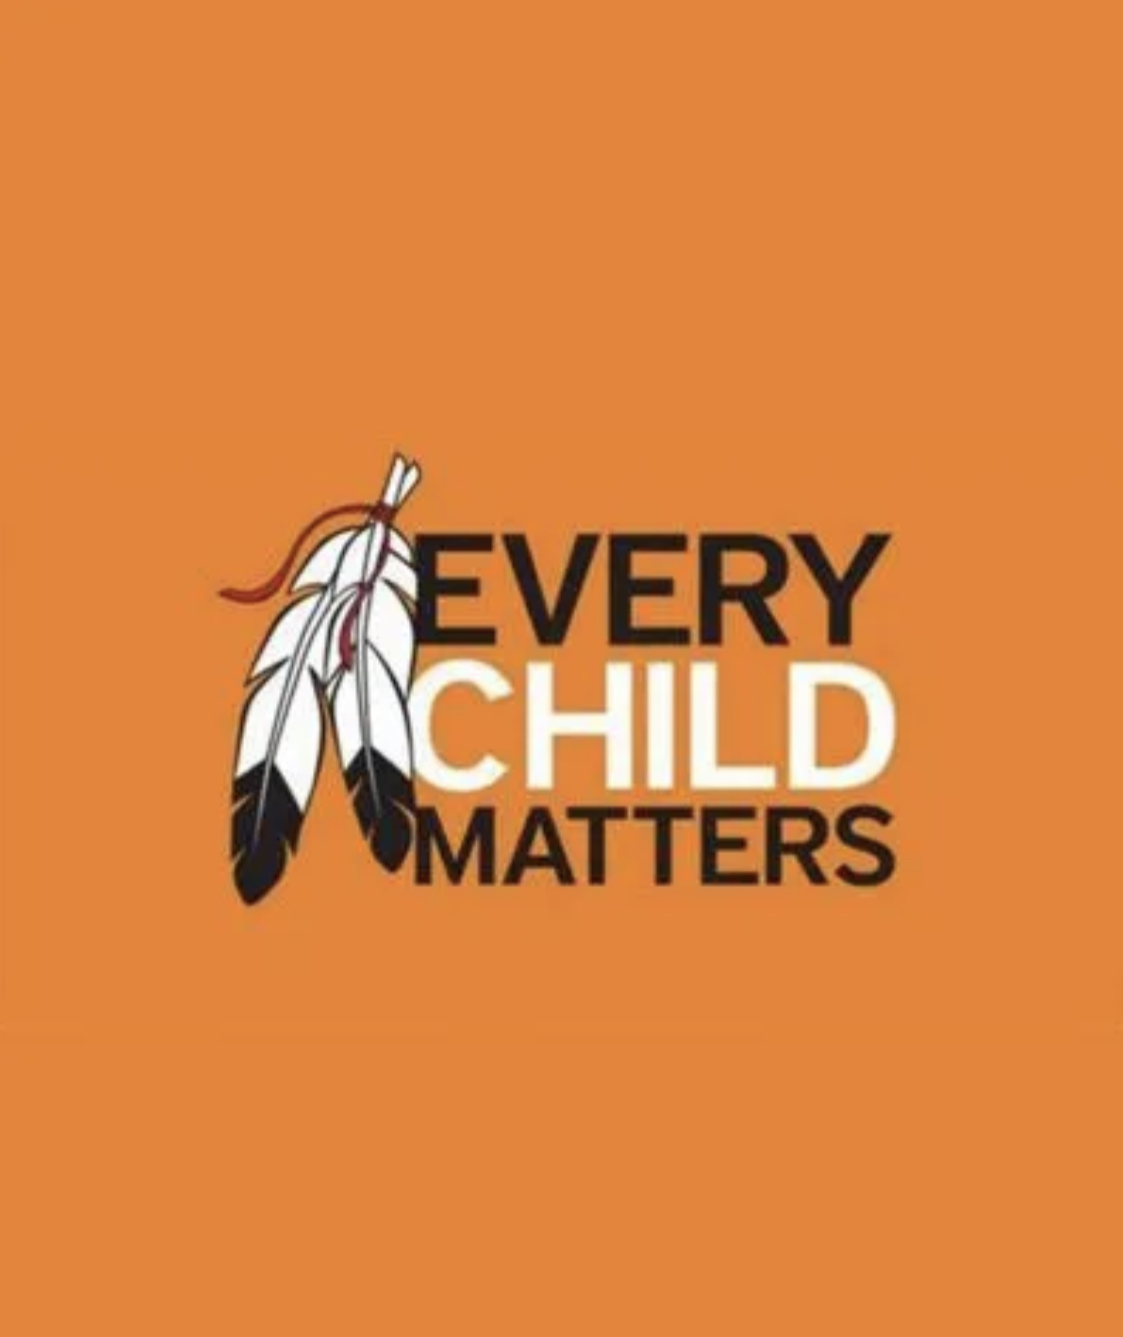 “Every child matters” in an orange background beside two black and white feathers